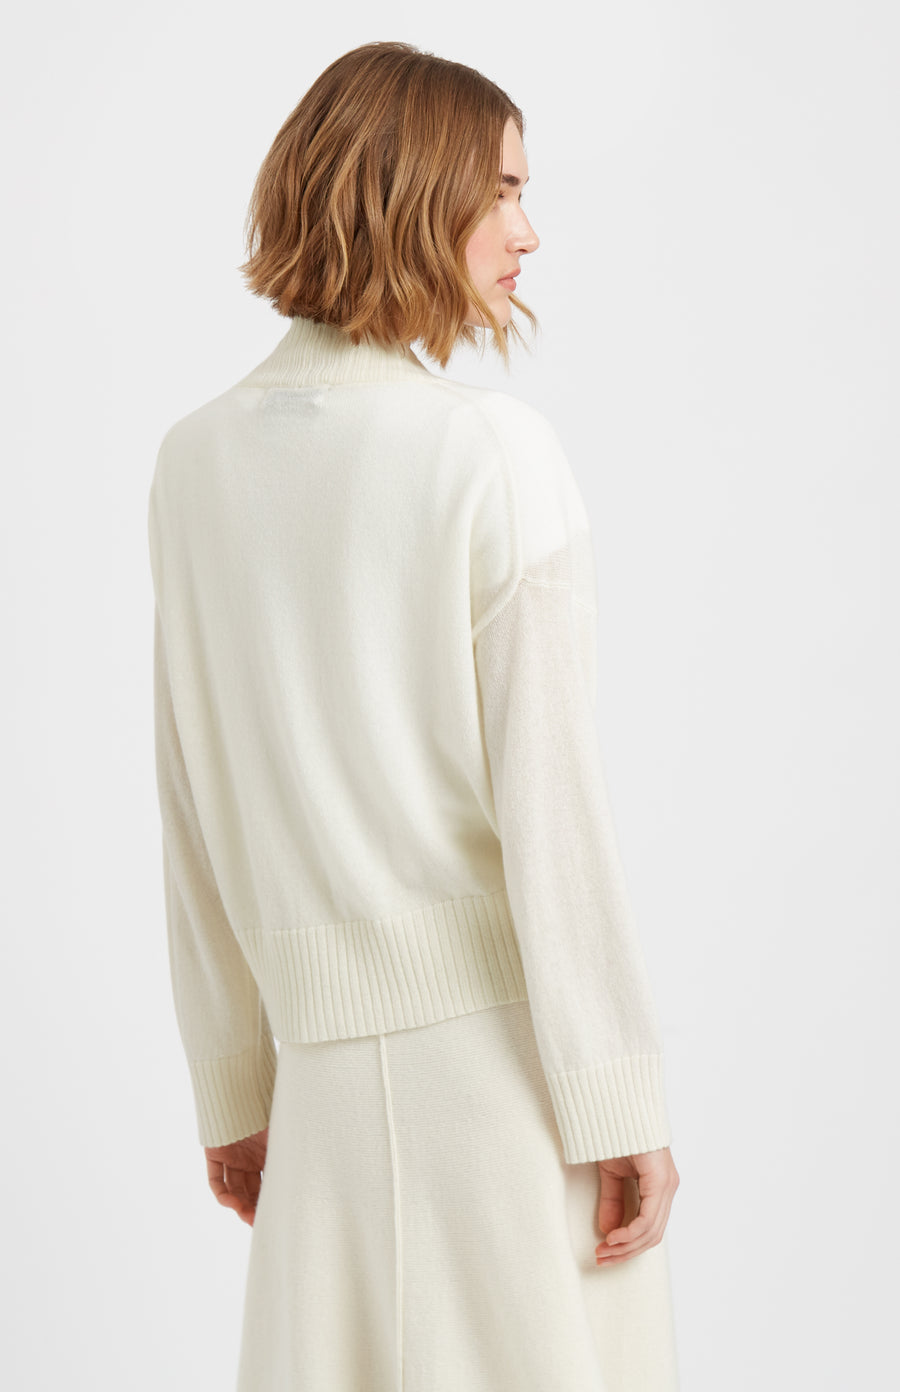 Pringle of Scotland Lightweight Cashmere Cardigan with Tie in Off White rear view